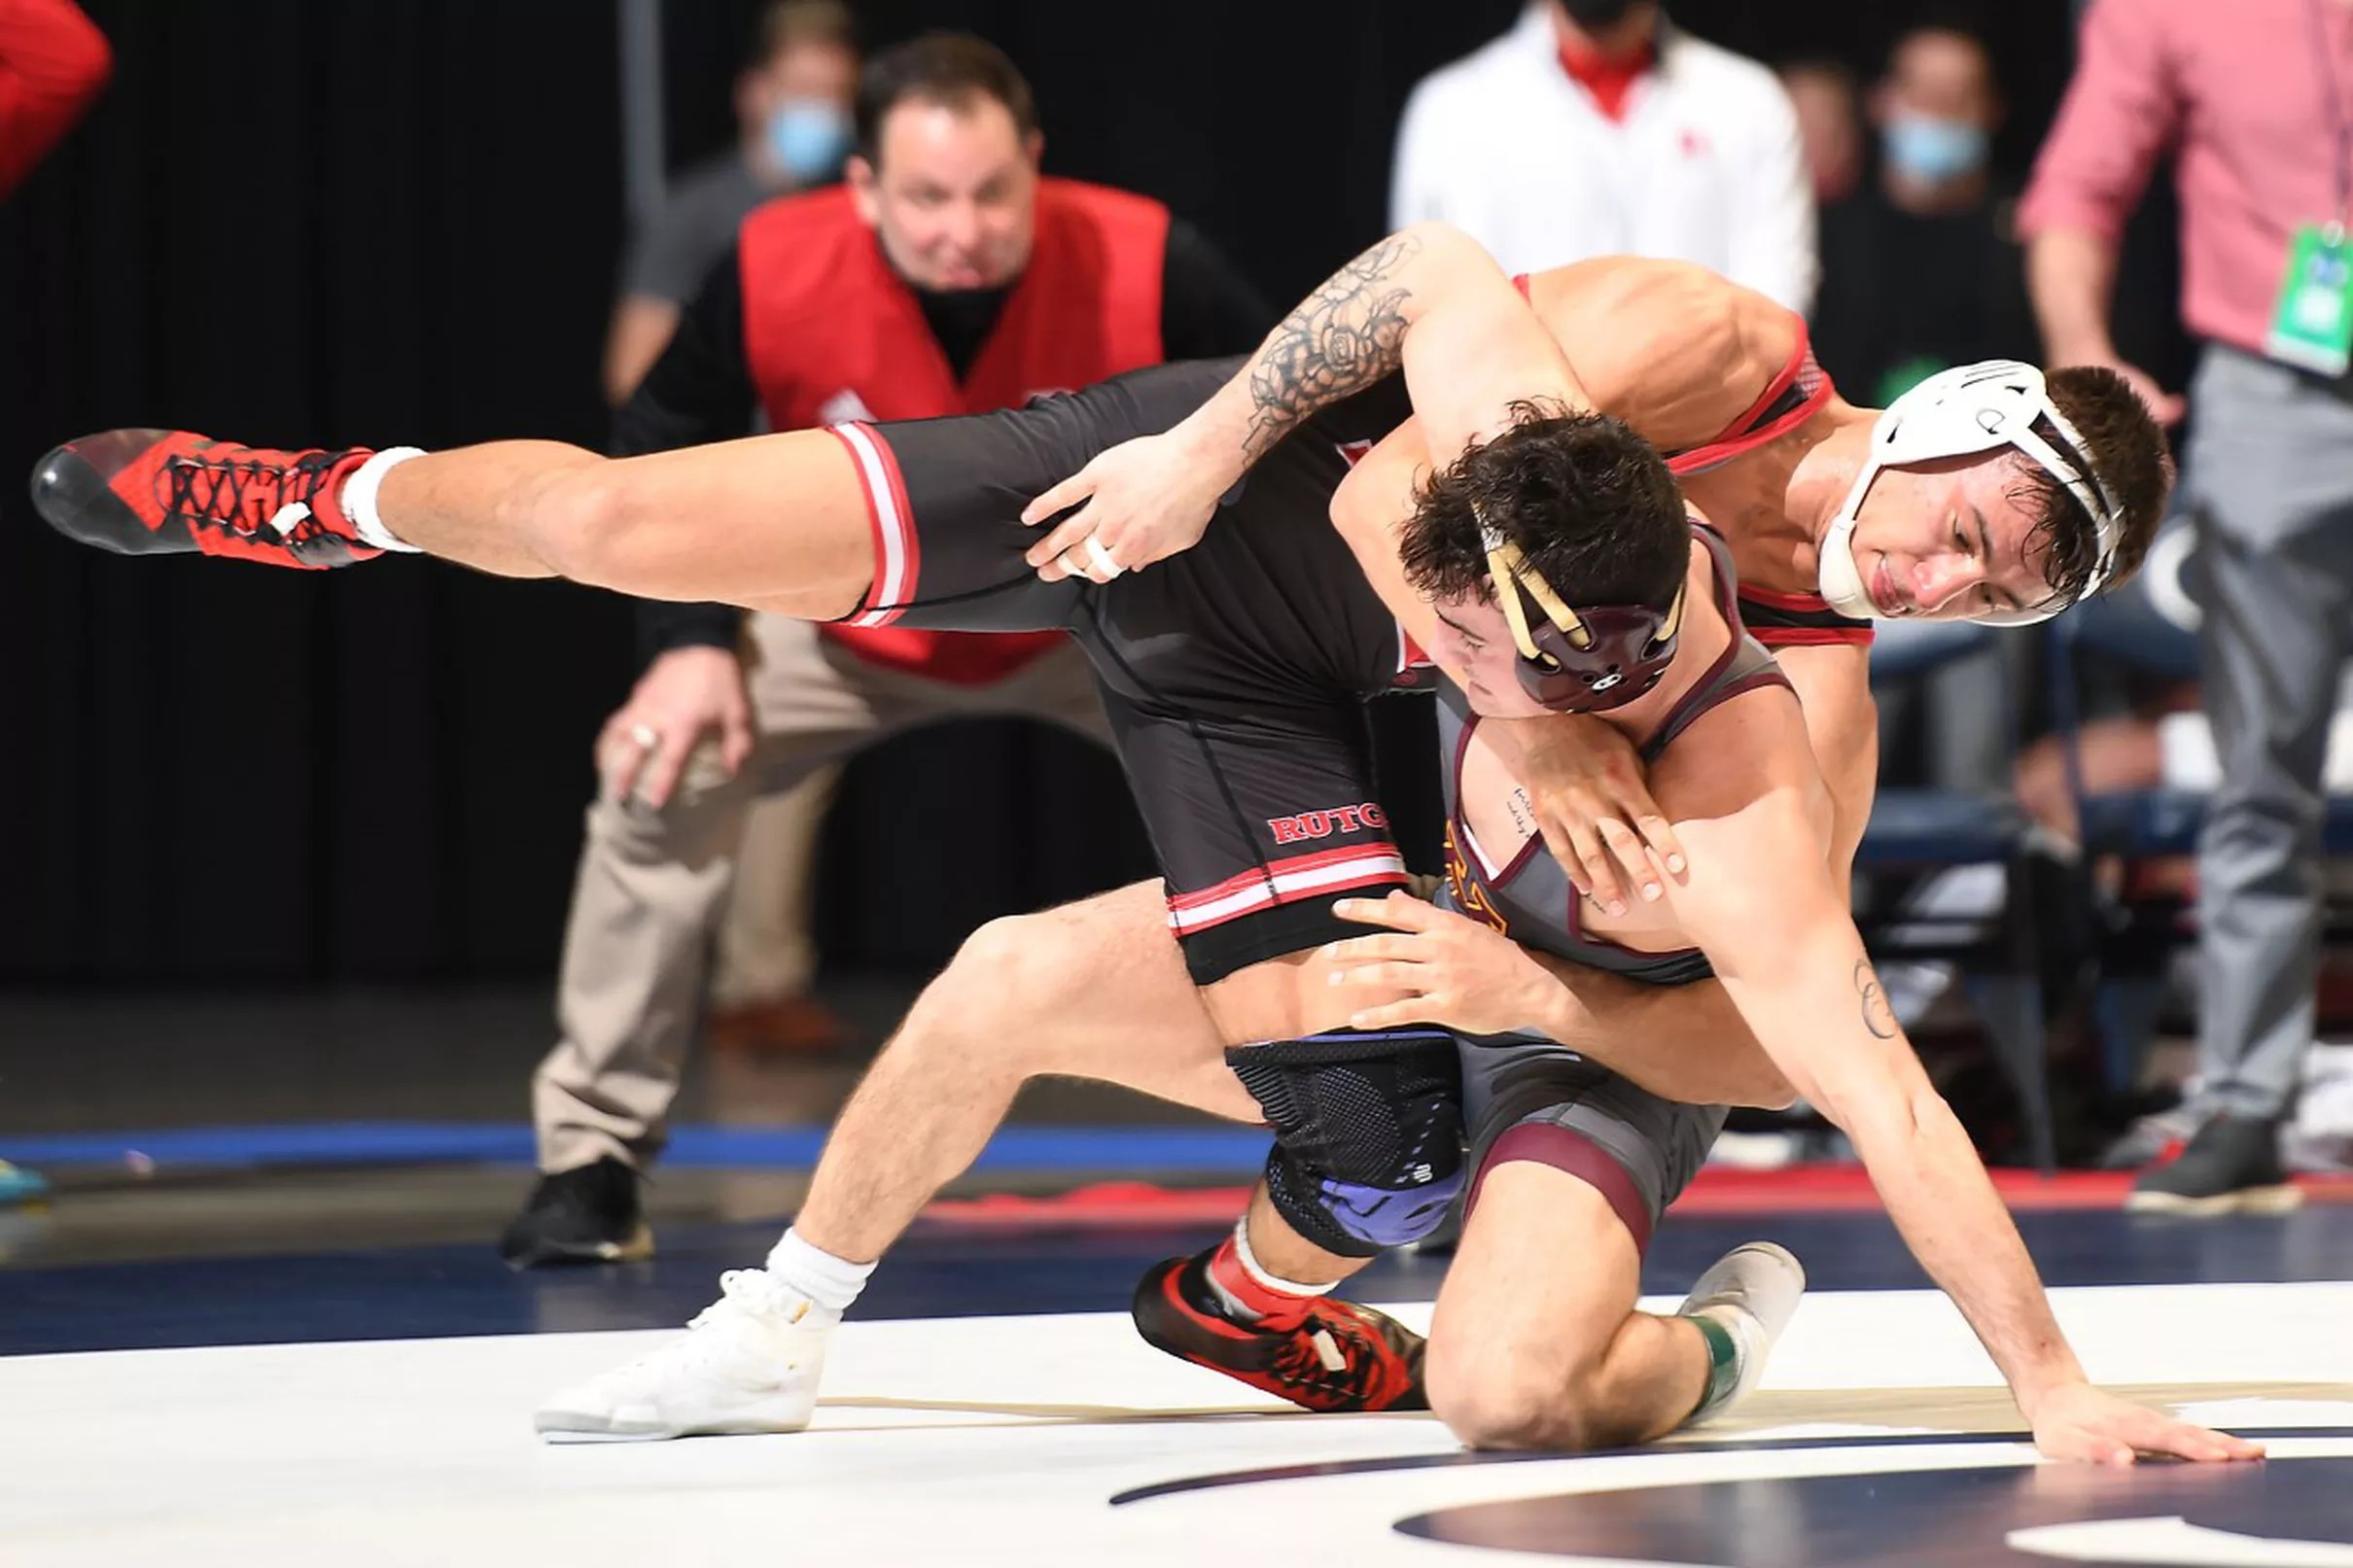 Rutgers Wrestling has five qualifiers headed to NCAA Championships